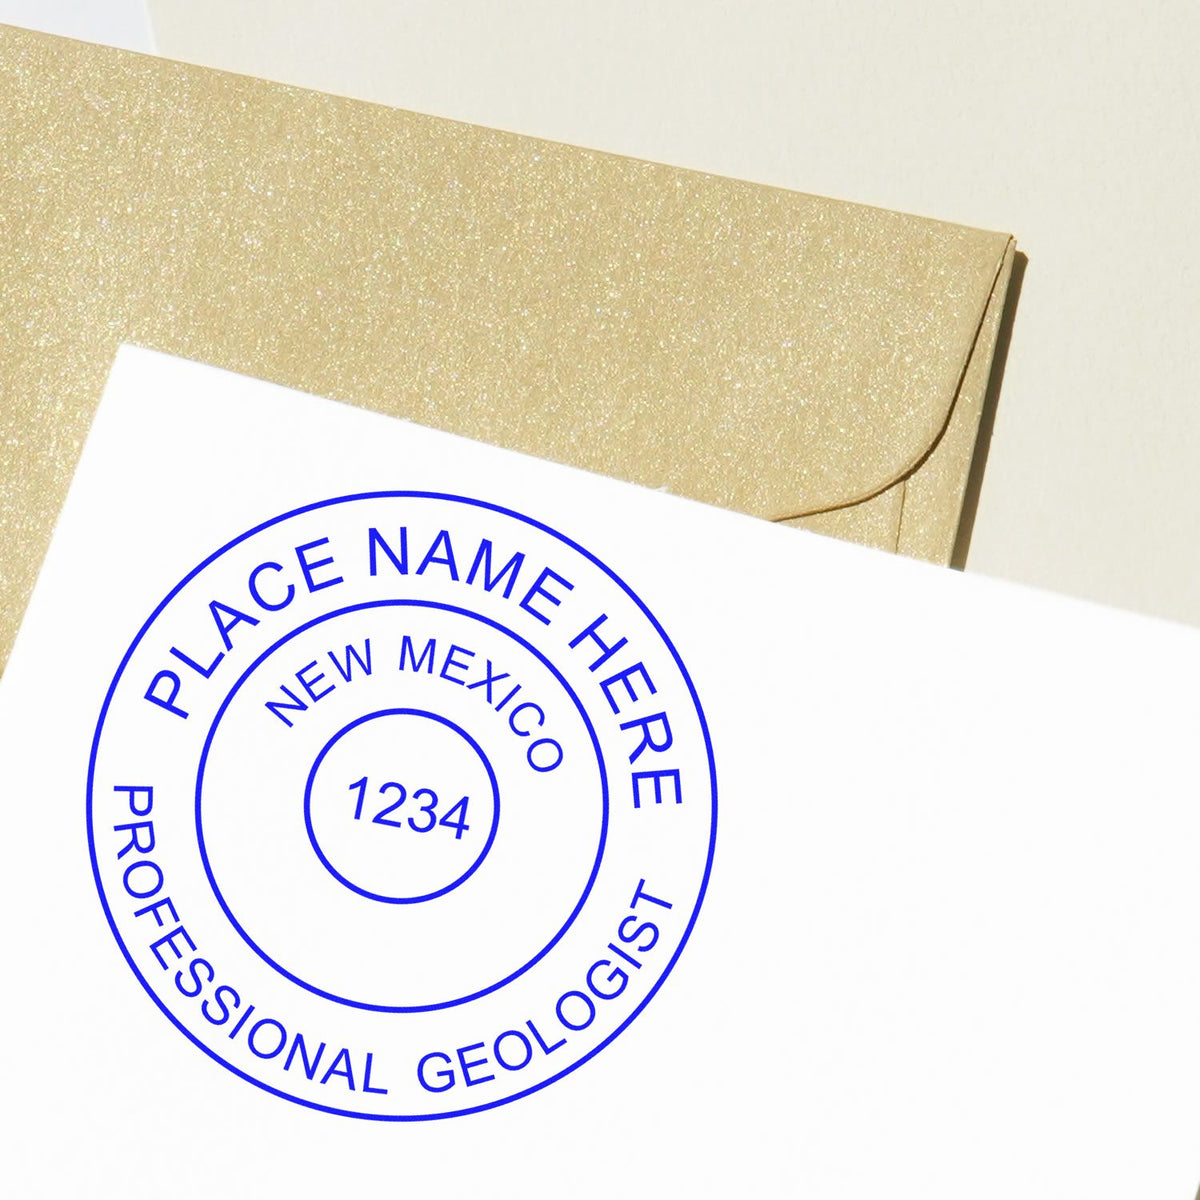 An alternative view of the Slim Pre-Inked New Mexico Professional Geologist Seal Stamp stamped on a sheet of paper showing the image in use